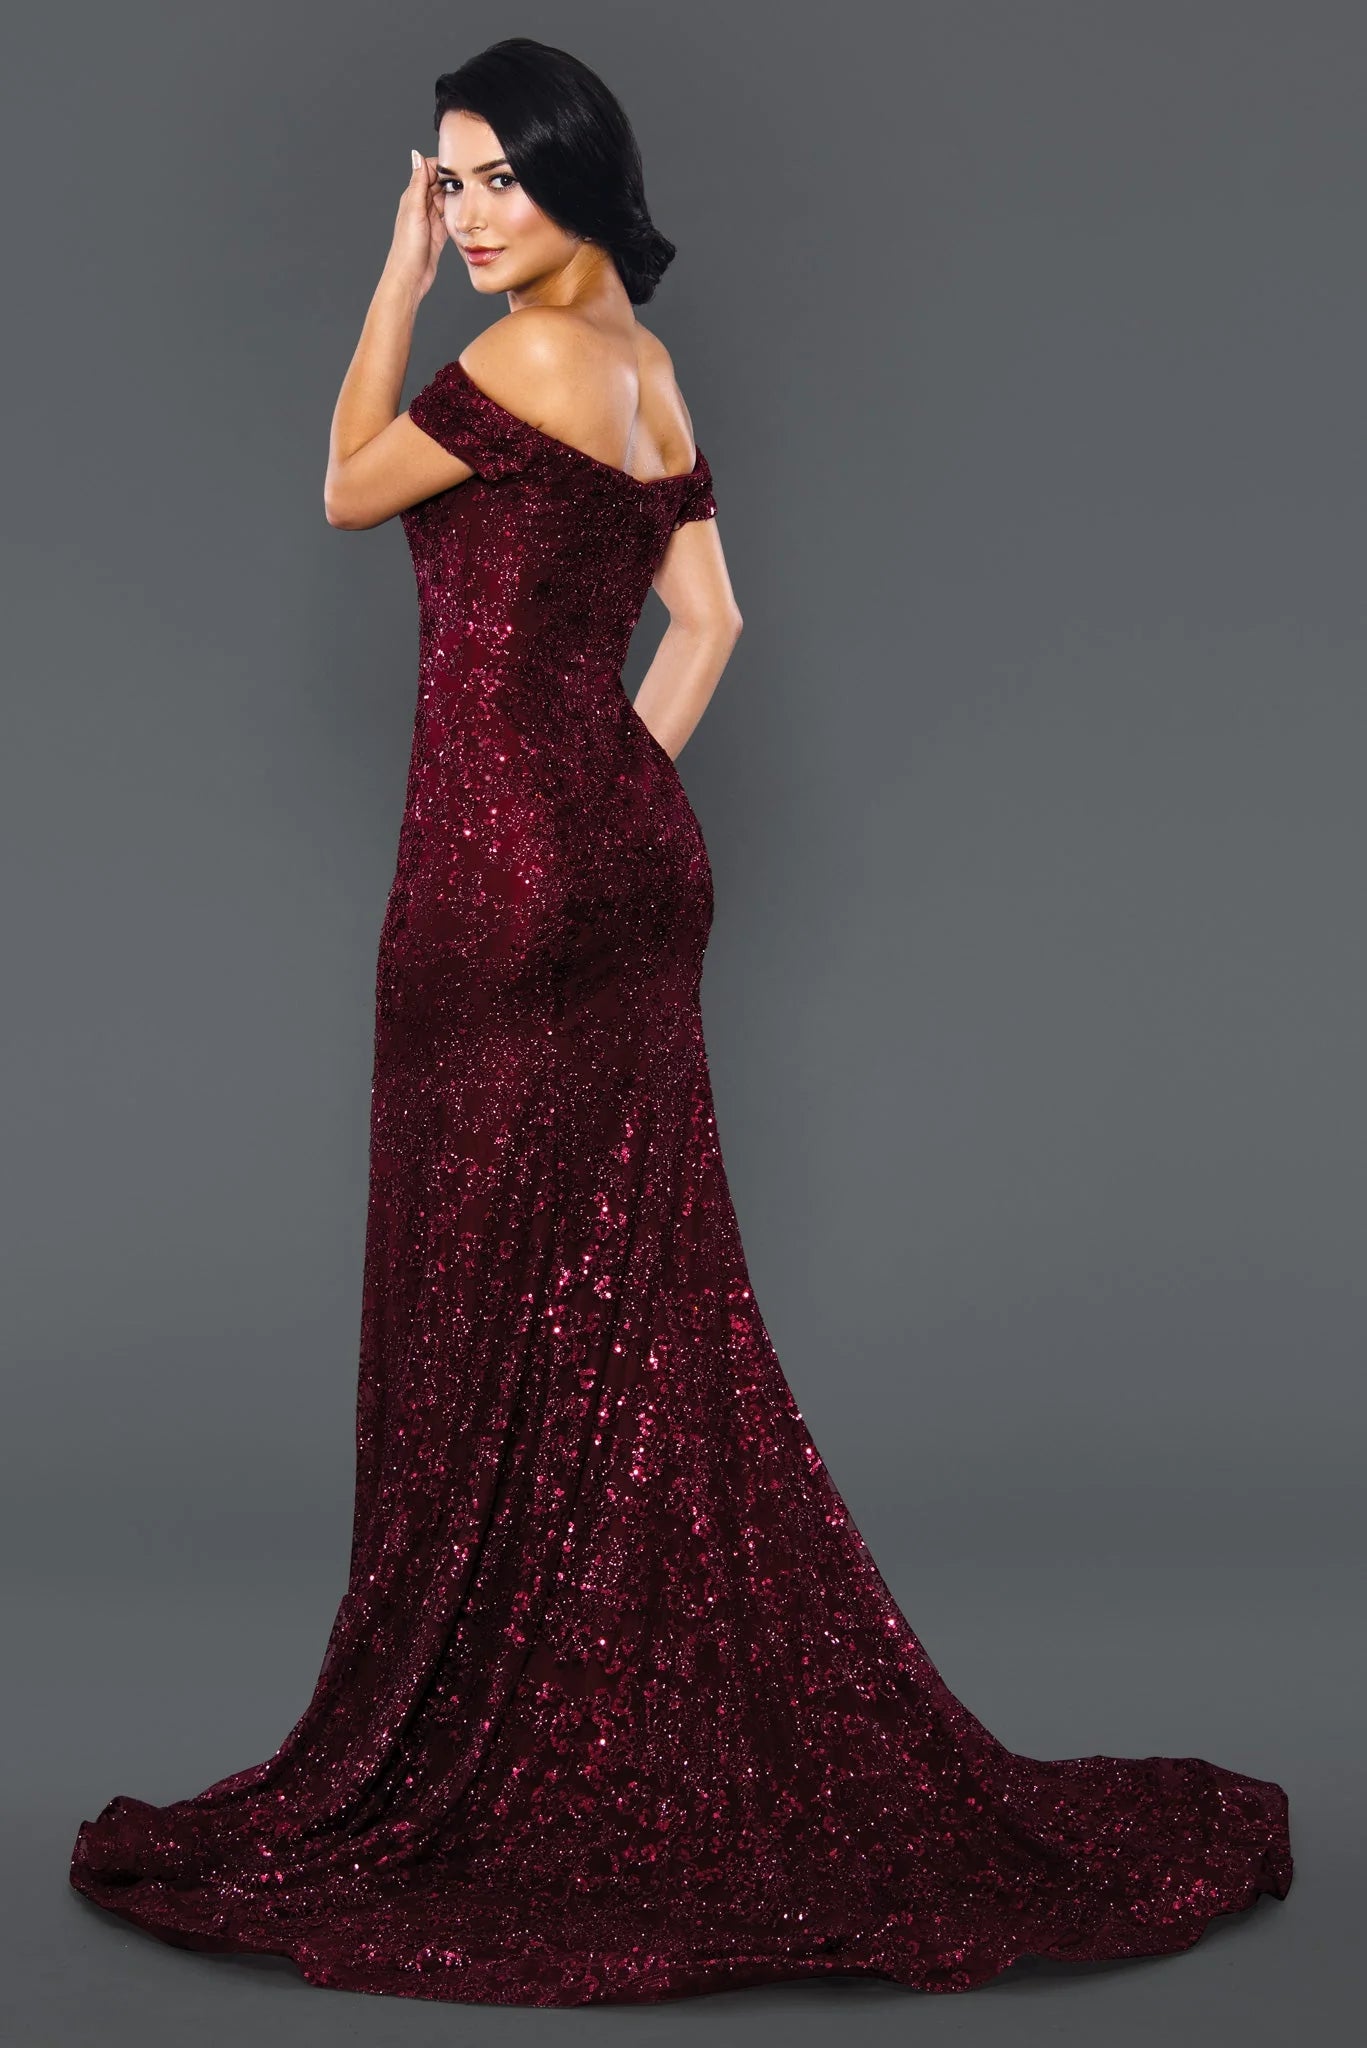 Stella Couture 22069 shimmer Glitter dress offers a stunningly glamorous look for prom. The fitted silhouette and off-the-shoulder design create an elegant, flattering shape, while sparkling glitter fabric adds a touch of glamour. Perfect for making a statement at your prom or special event. 